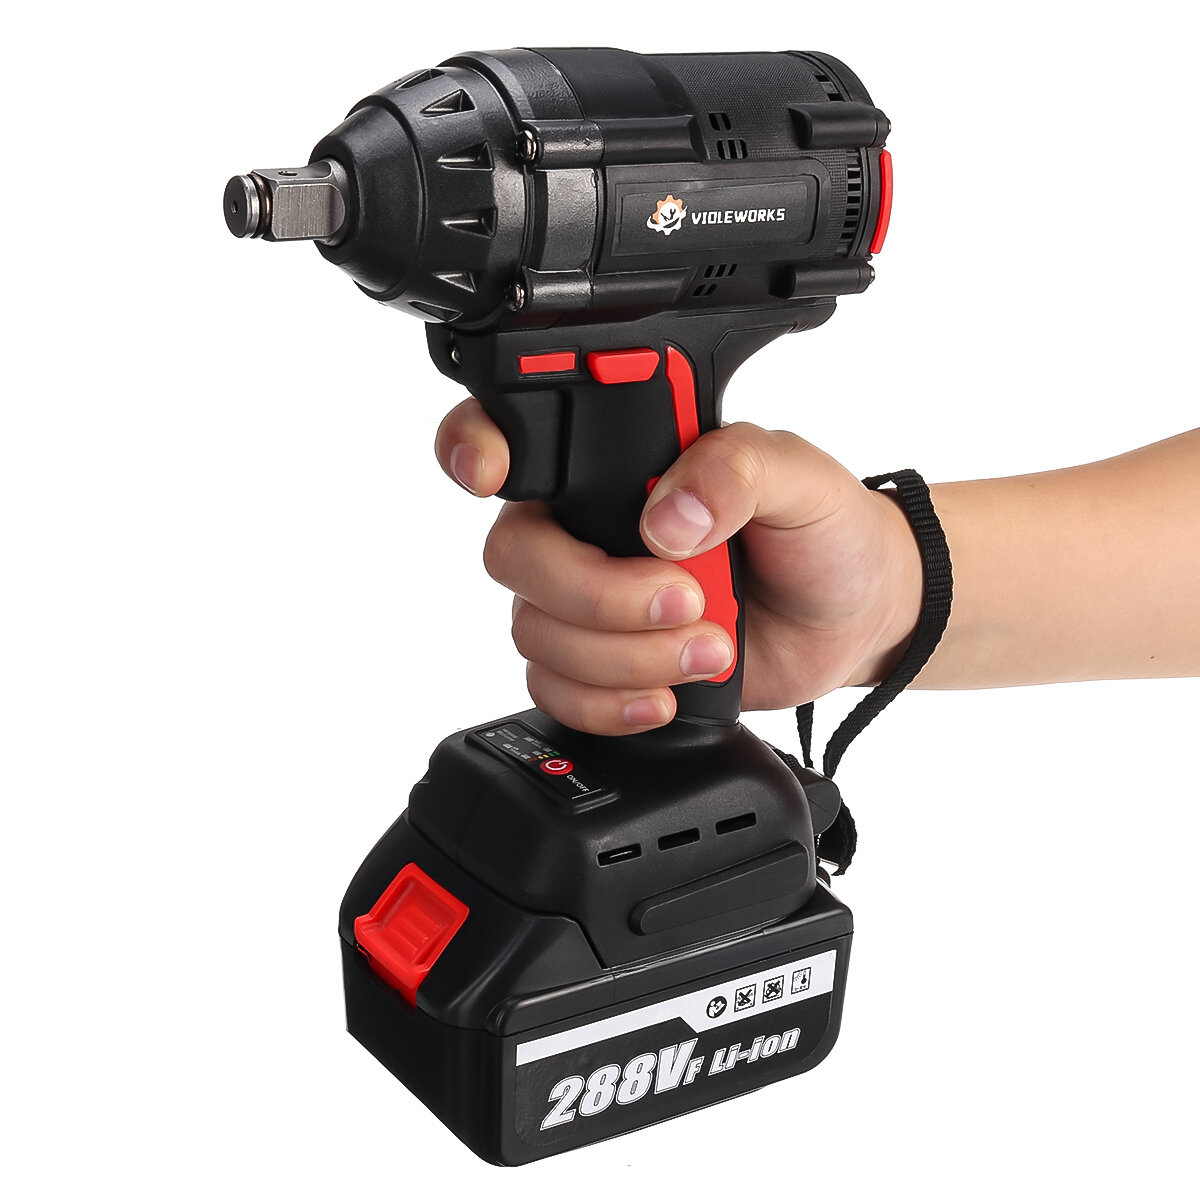 Image of VIOLEWORKS 288VF 1/2" 520NM Max Brushless Impact Wrench Motor Electric Wrench With/without Battery